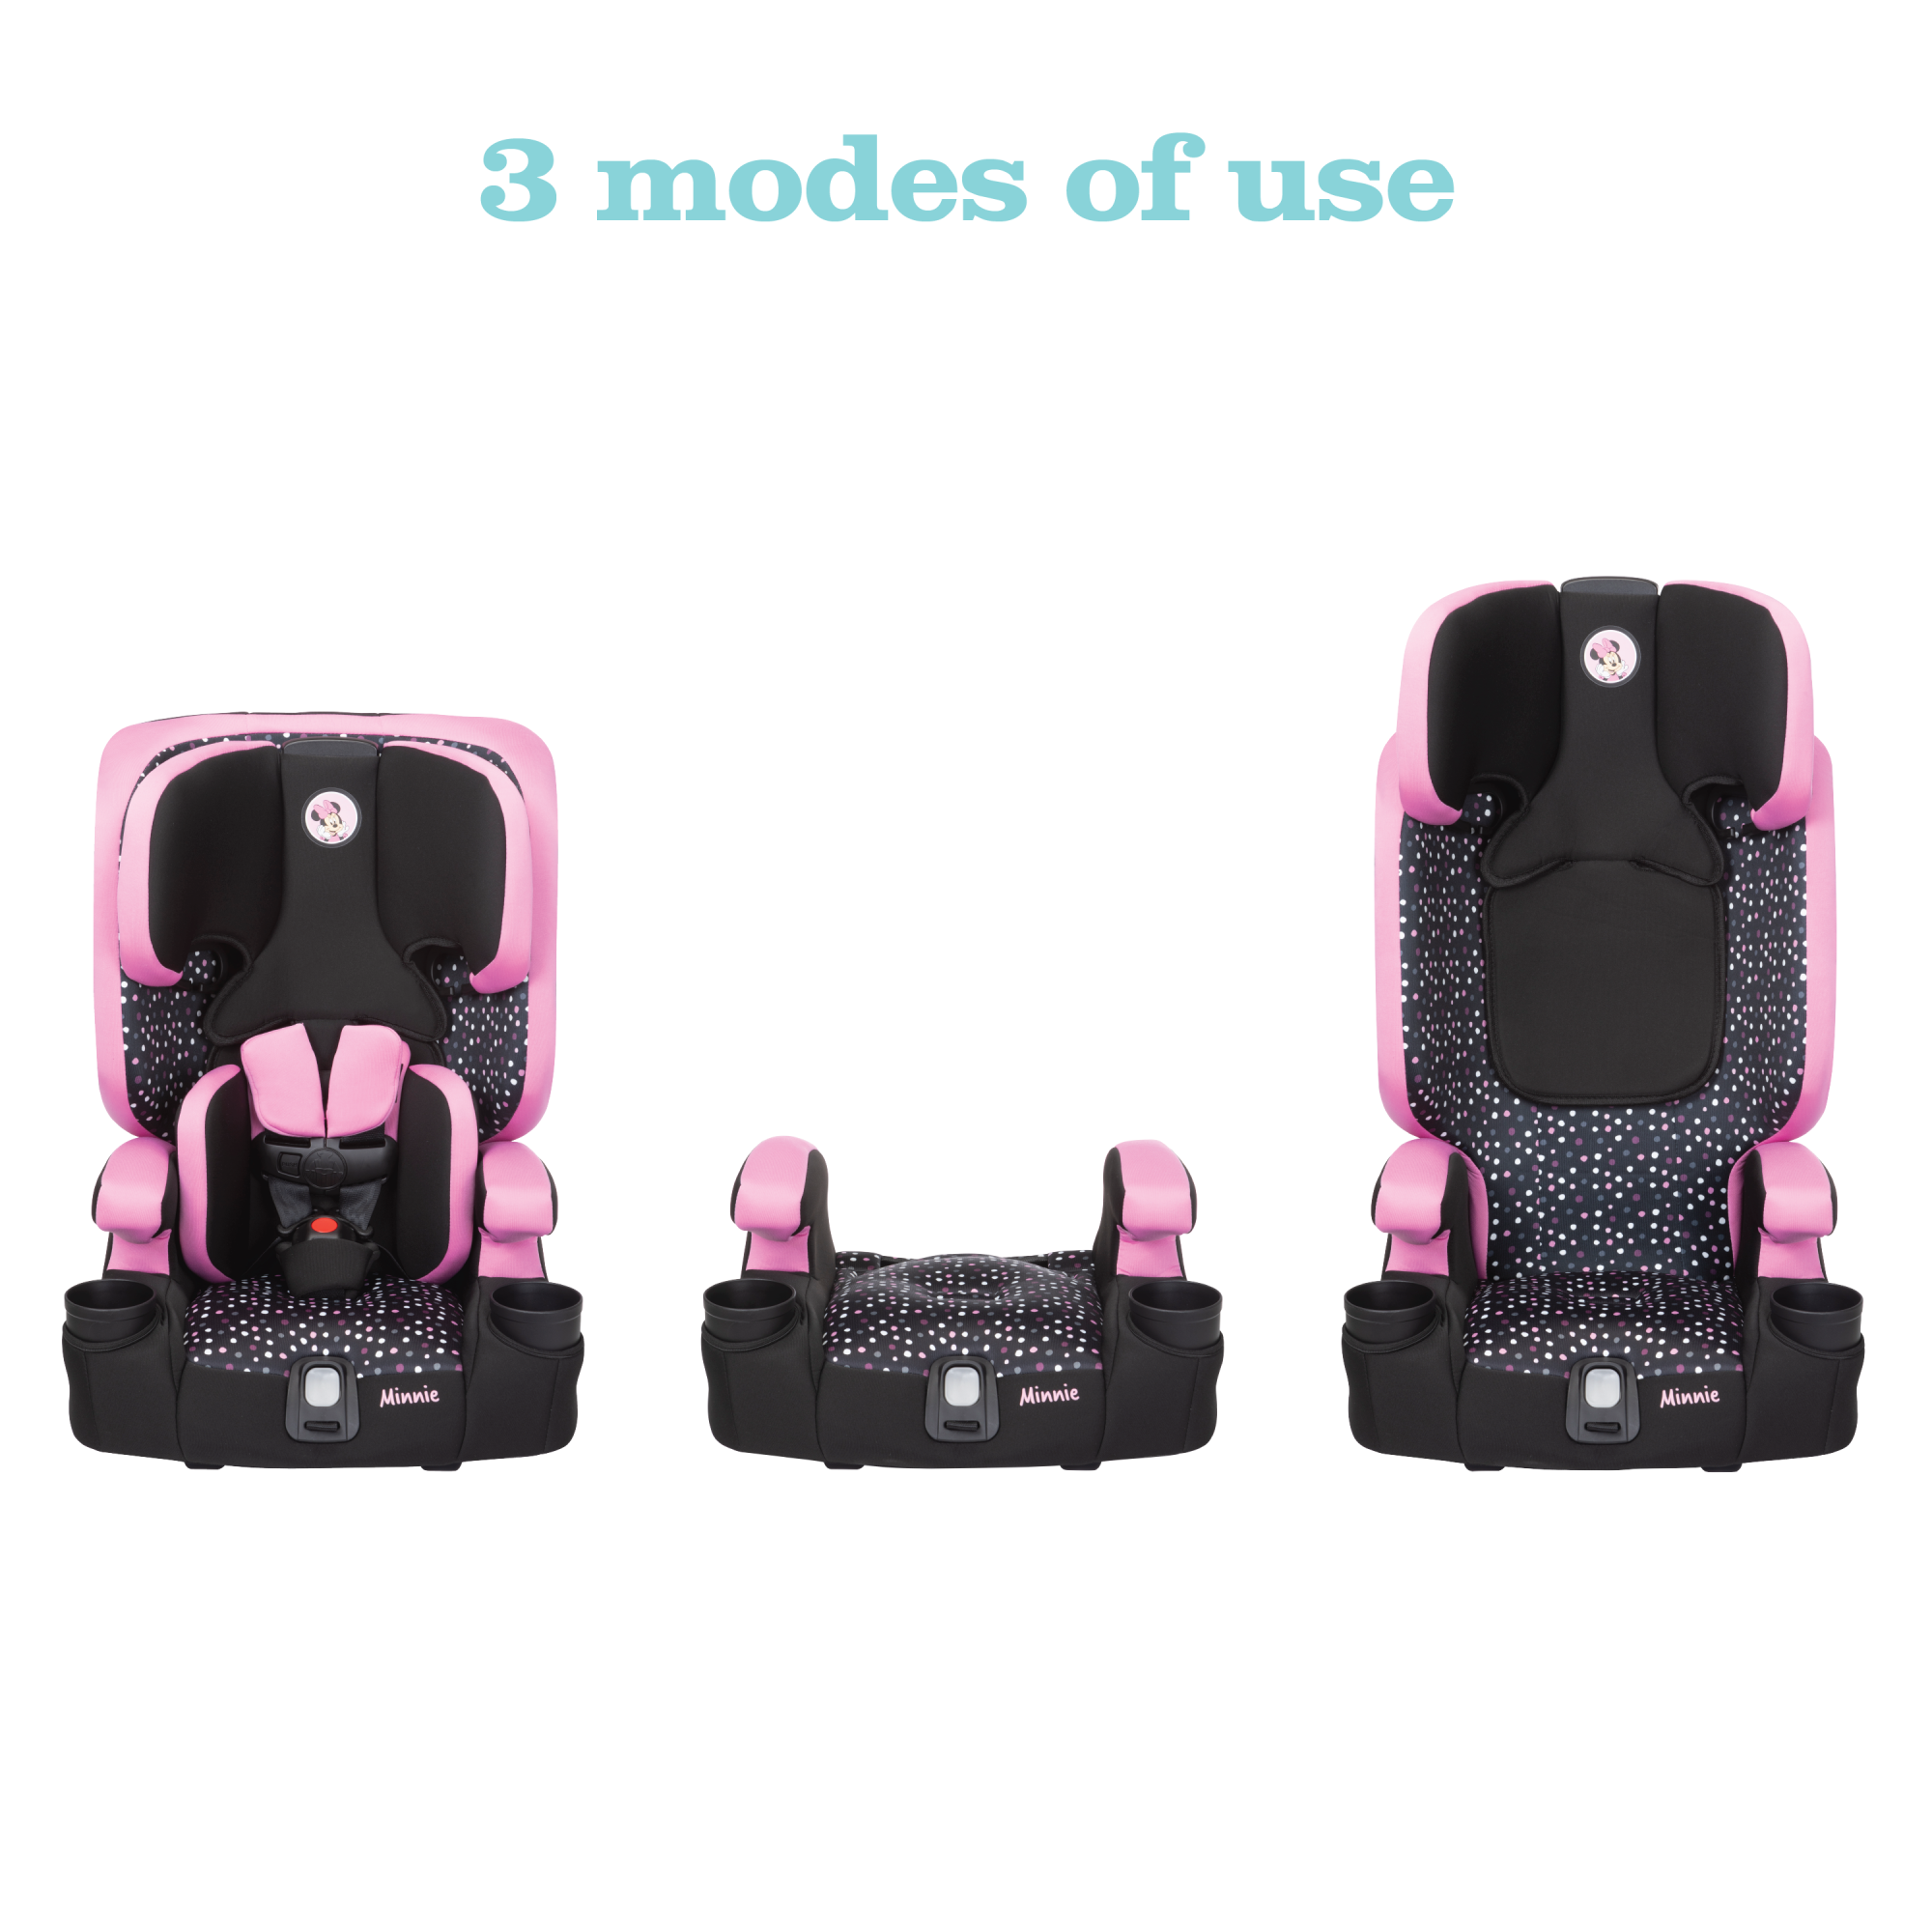 Disney Baby MagicSquad 3-in-1 Harness Booster Car Seat - Minnie Dot Party - 1-hand adjustable headrest